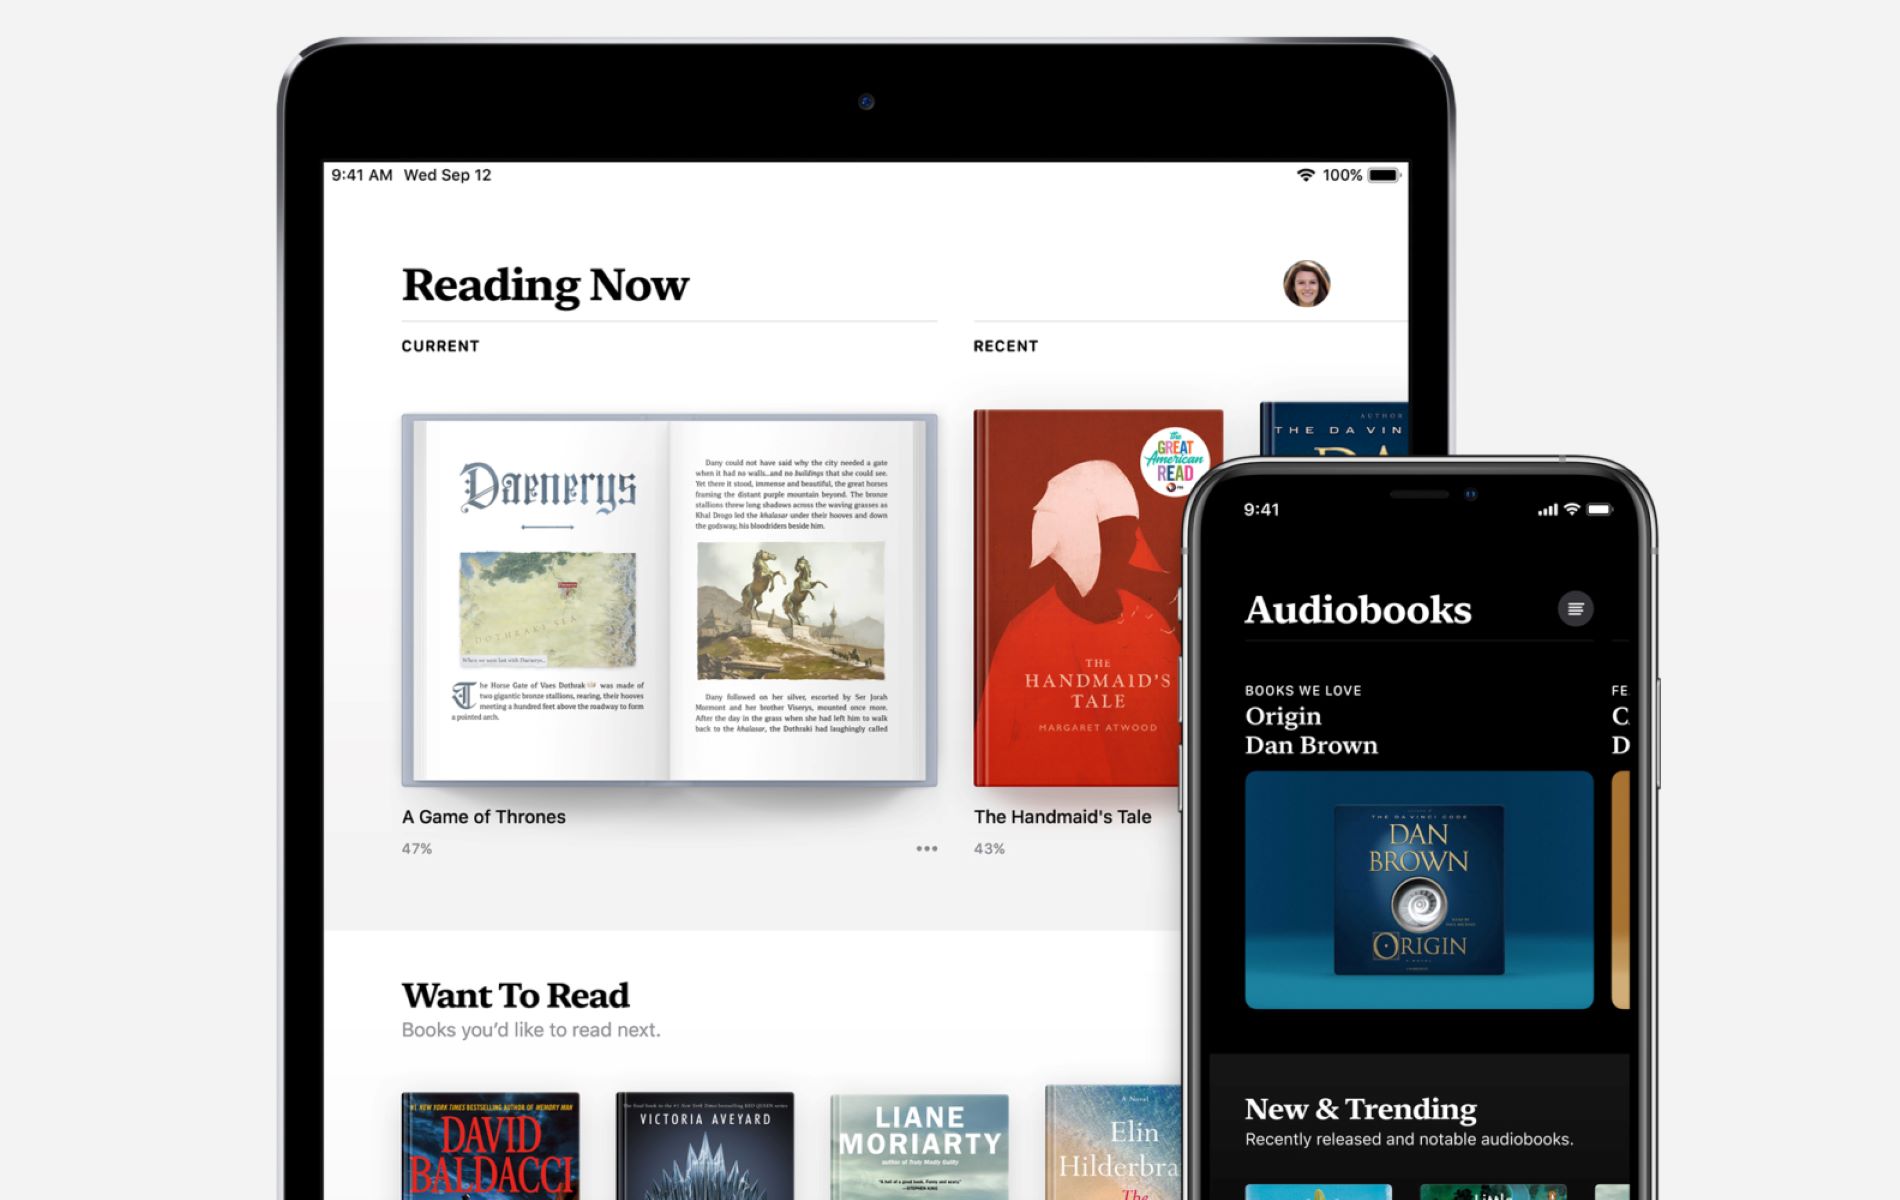 How To Search For And Purchase An Apple Audiobook